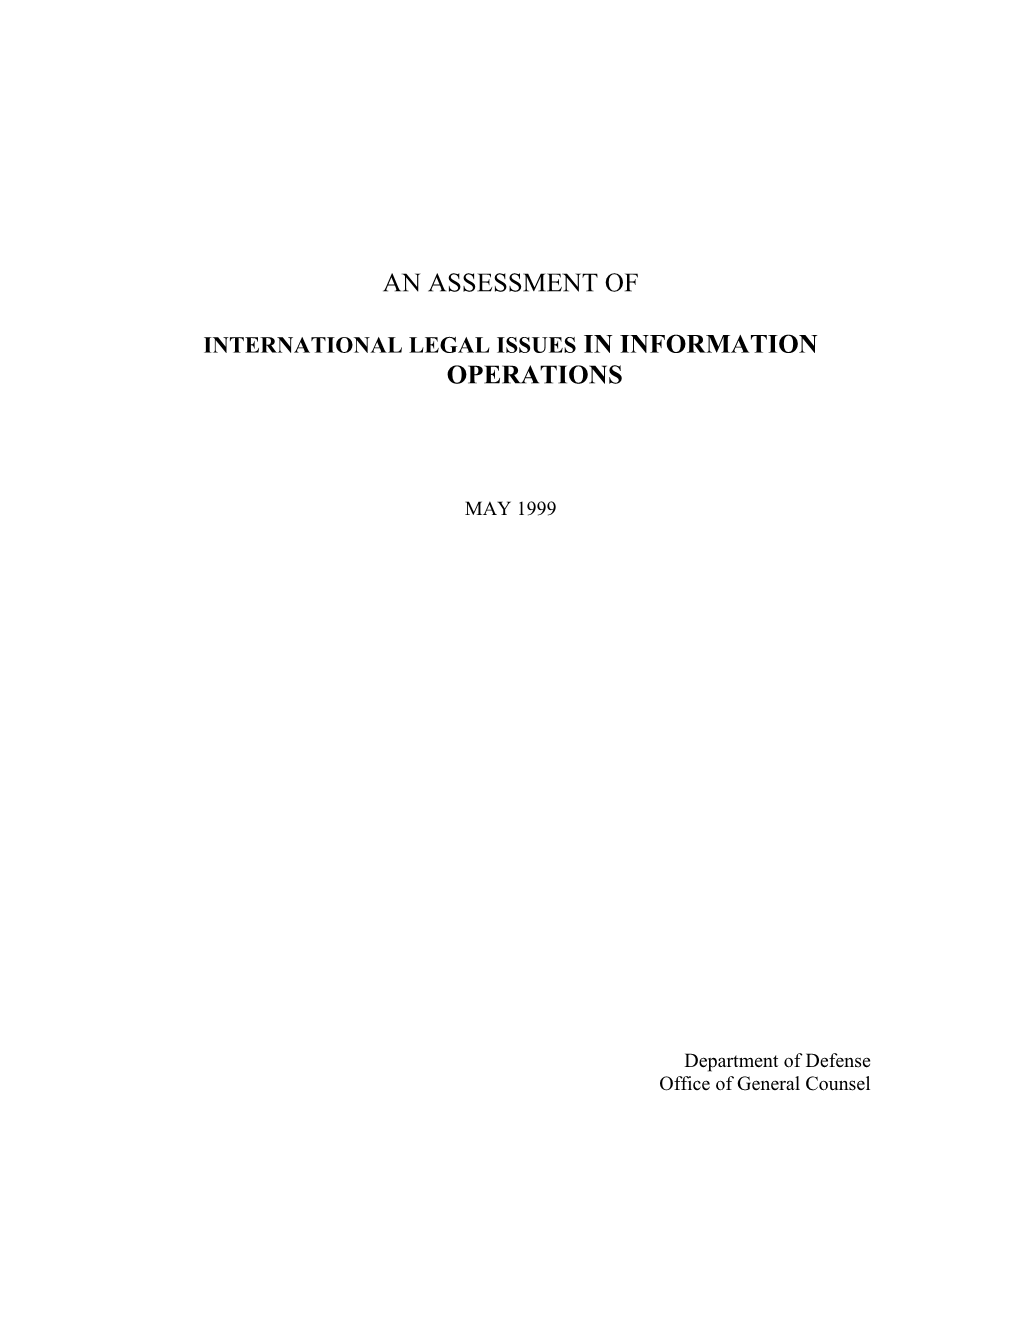 International Legal Issues in Information Operations